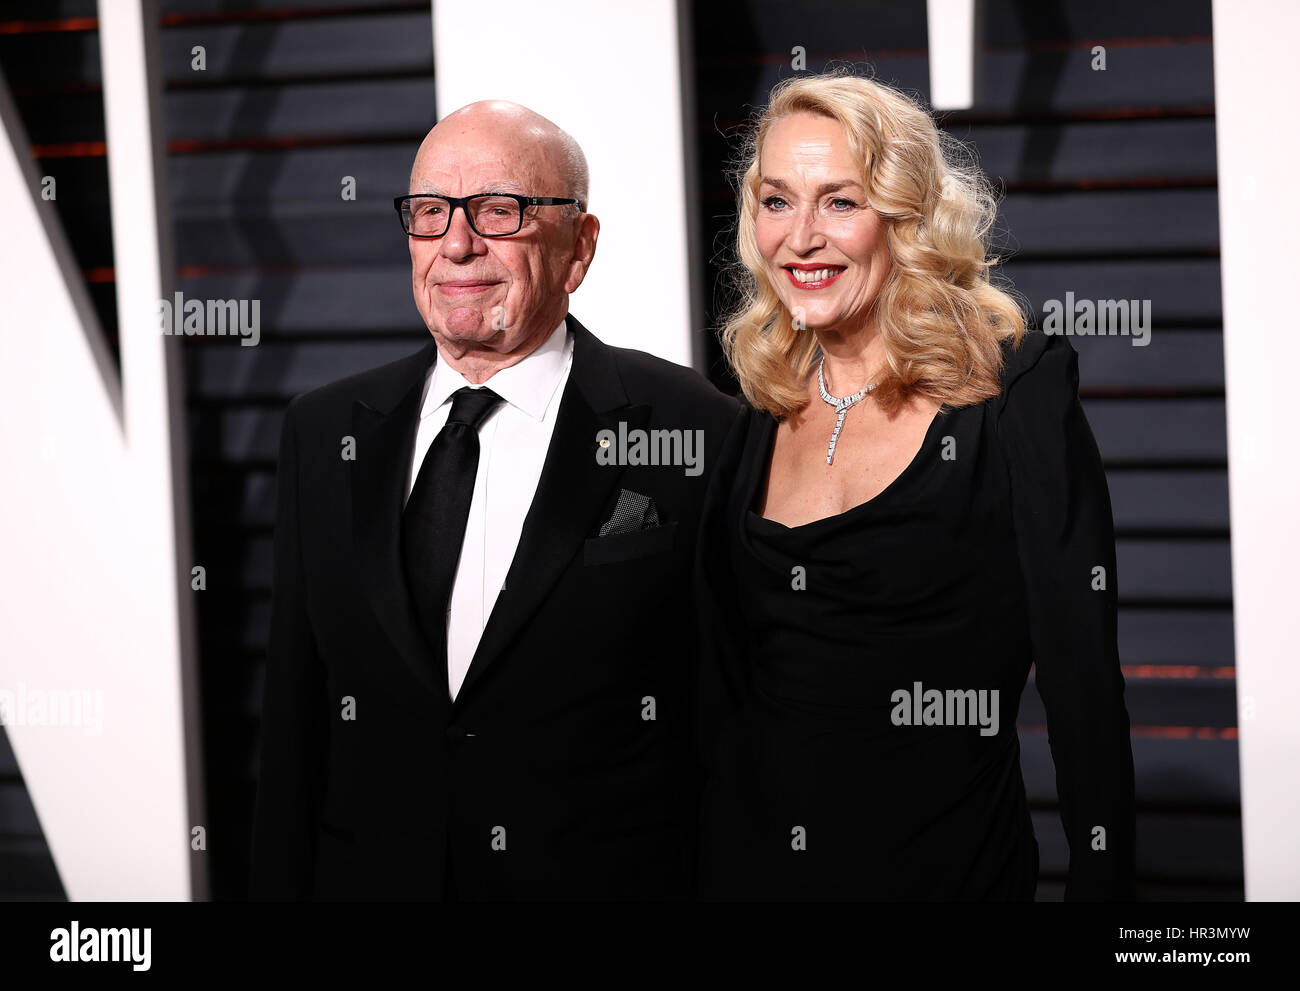 Beverly Hills, California, USA. 26th Feb, 2017. Rupert Murdoch and Jerry Hall attend the Vanity Fair Oscar Party 2017 on February 26, 2017 in Beverly Hills, California. Credit: Mpi99/Media Punch/Alamy Live News Stock Photo